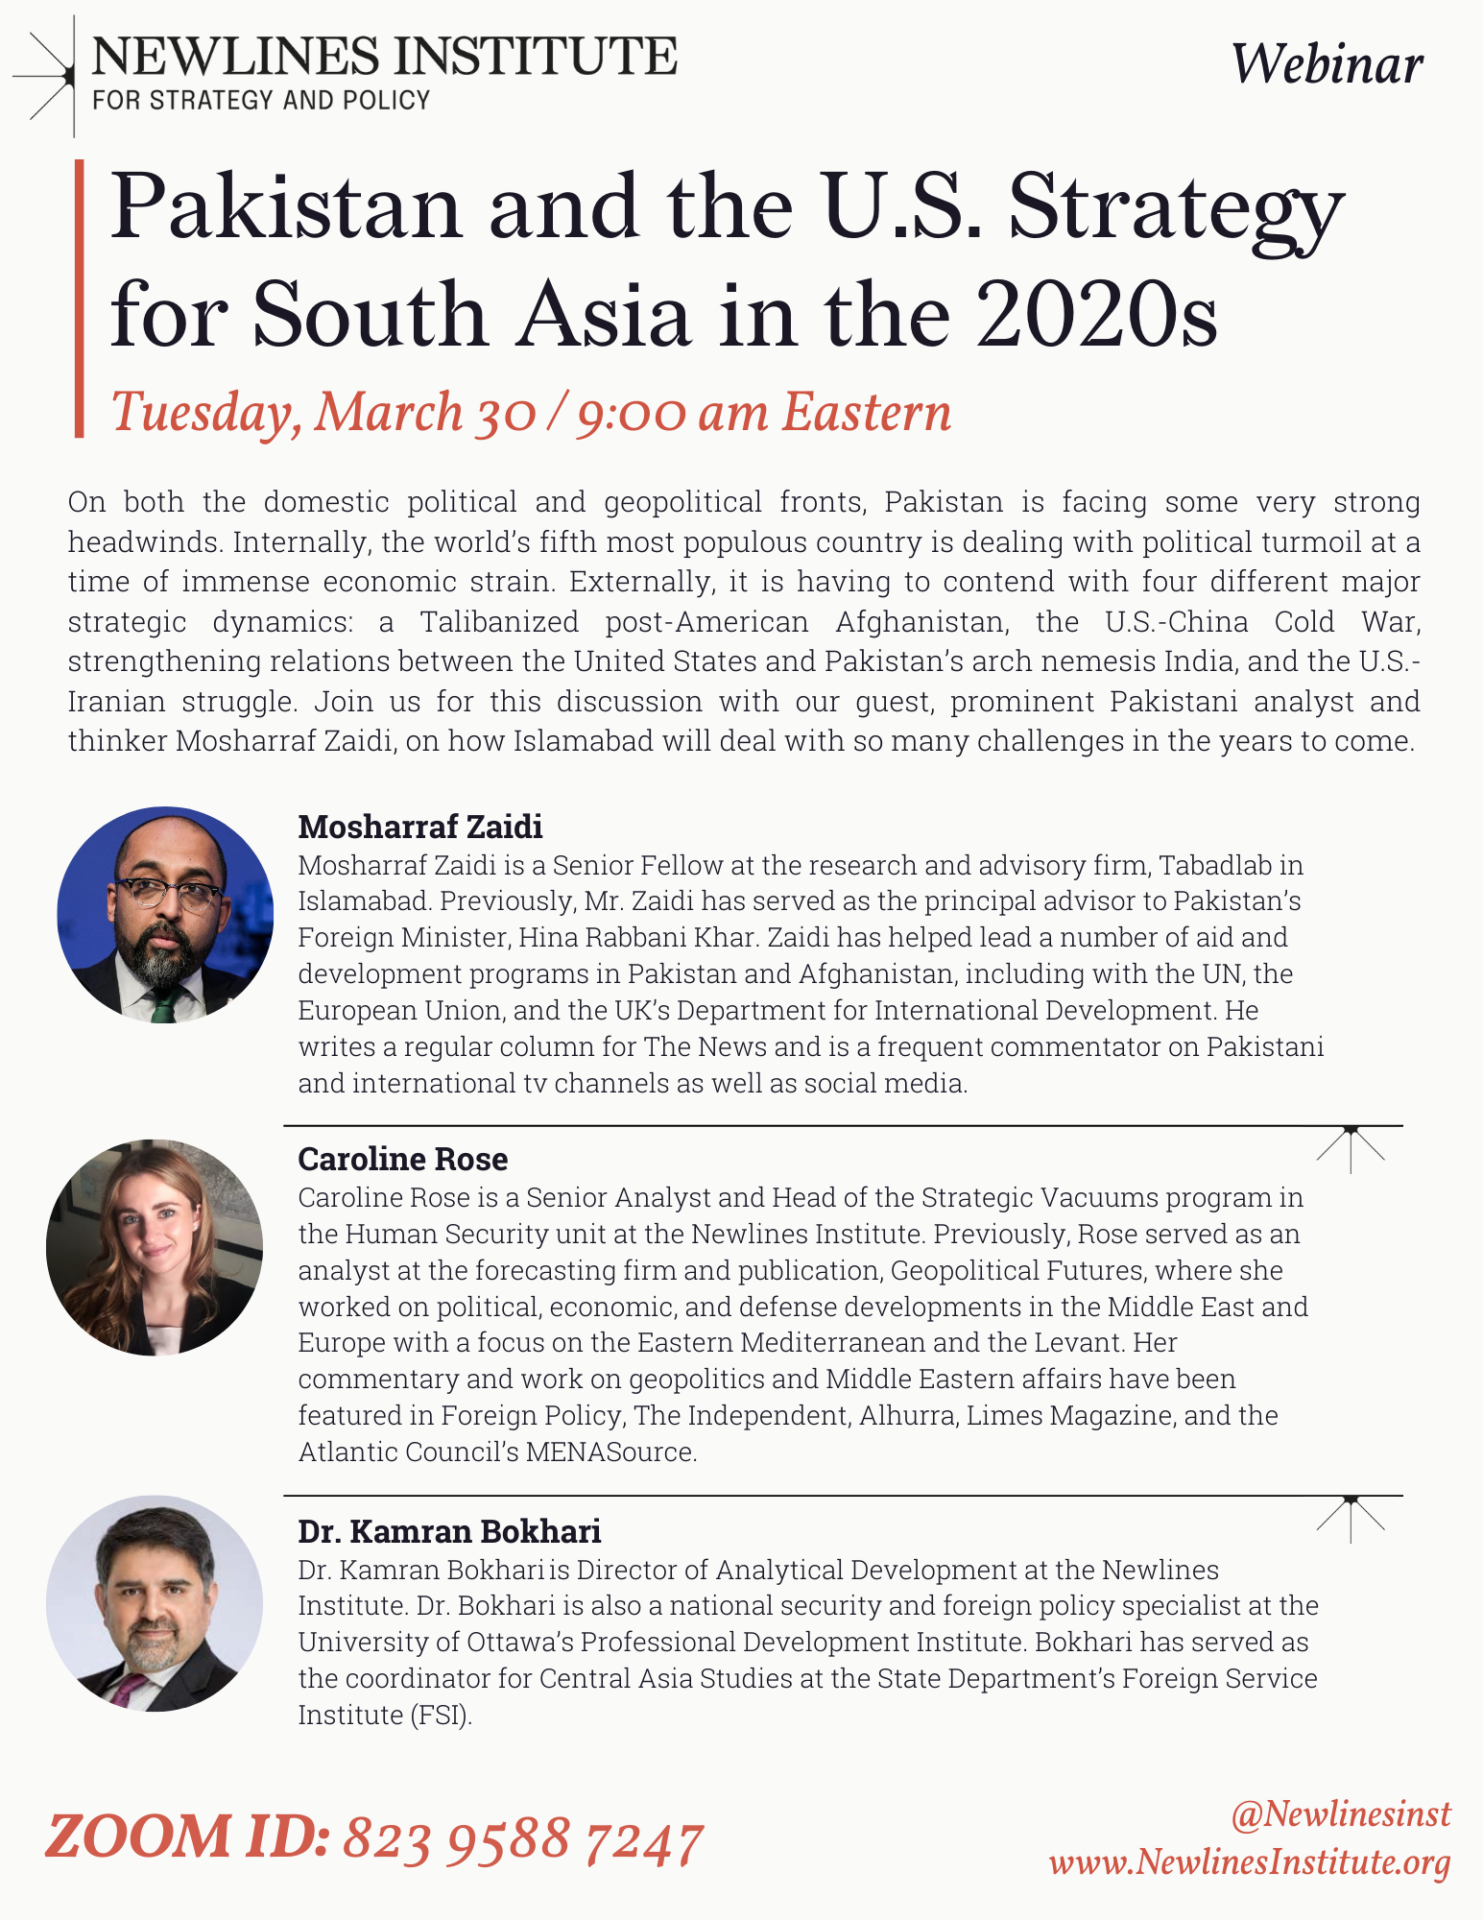 Pakistan & the U.S. Strategy for South Asia in the 2020s